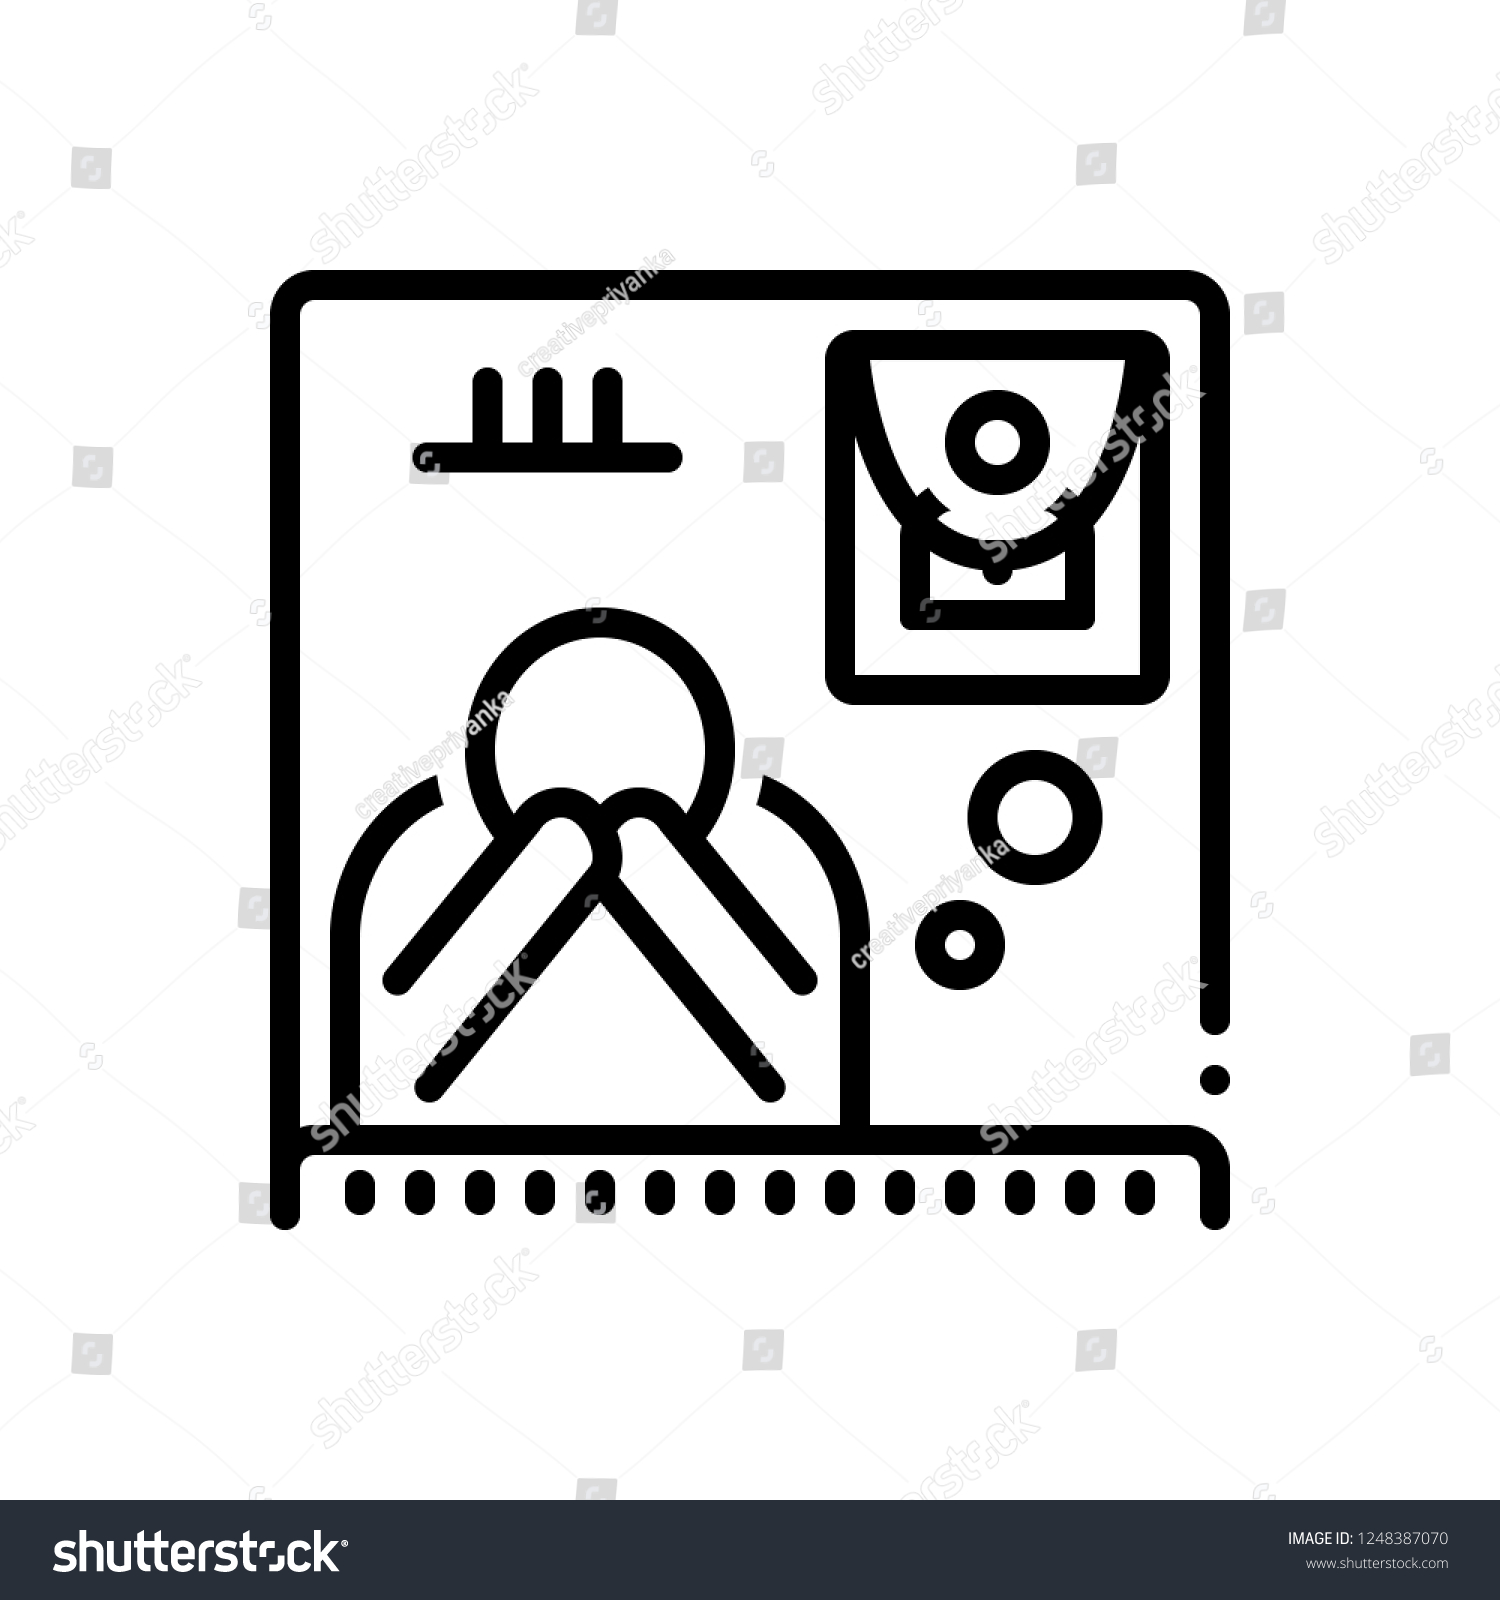 SVG of Abstract vector icon for the bereaved svg